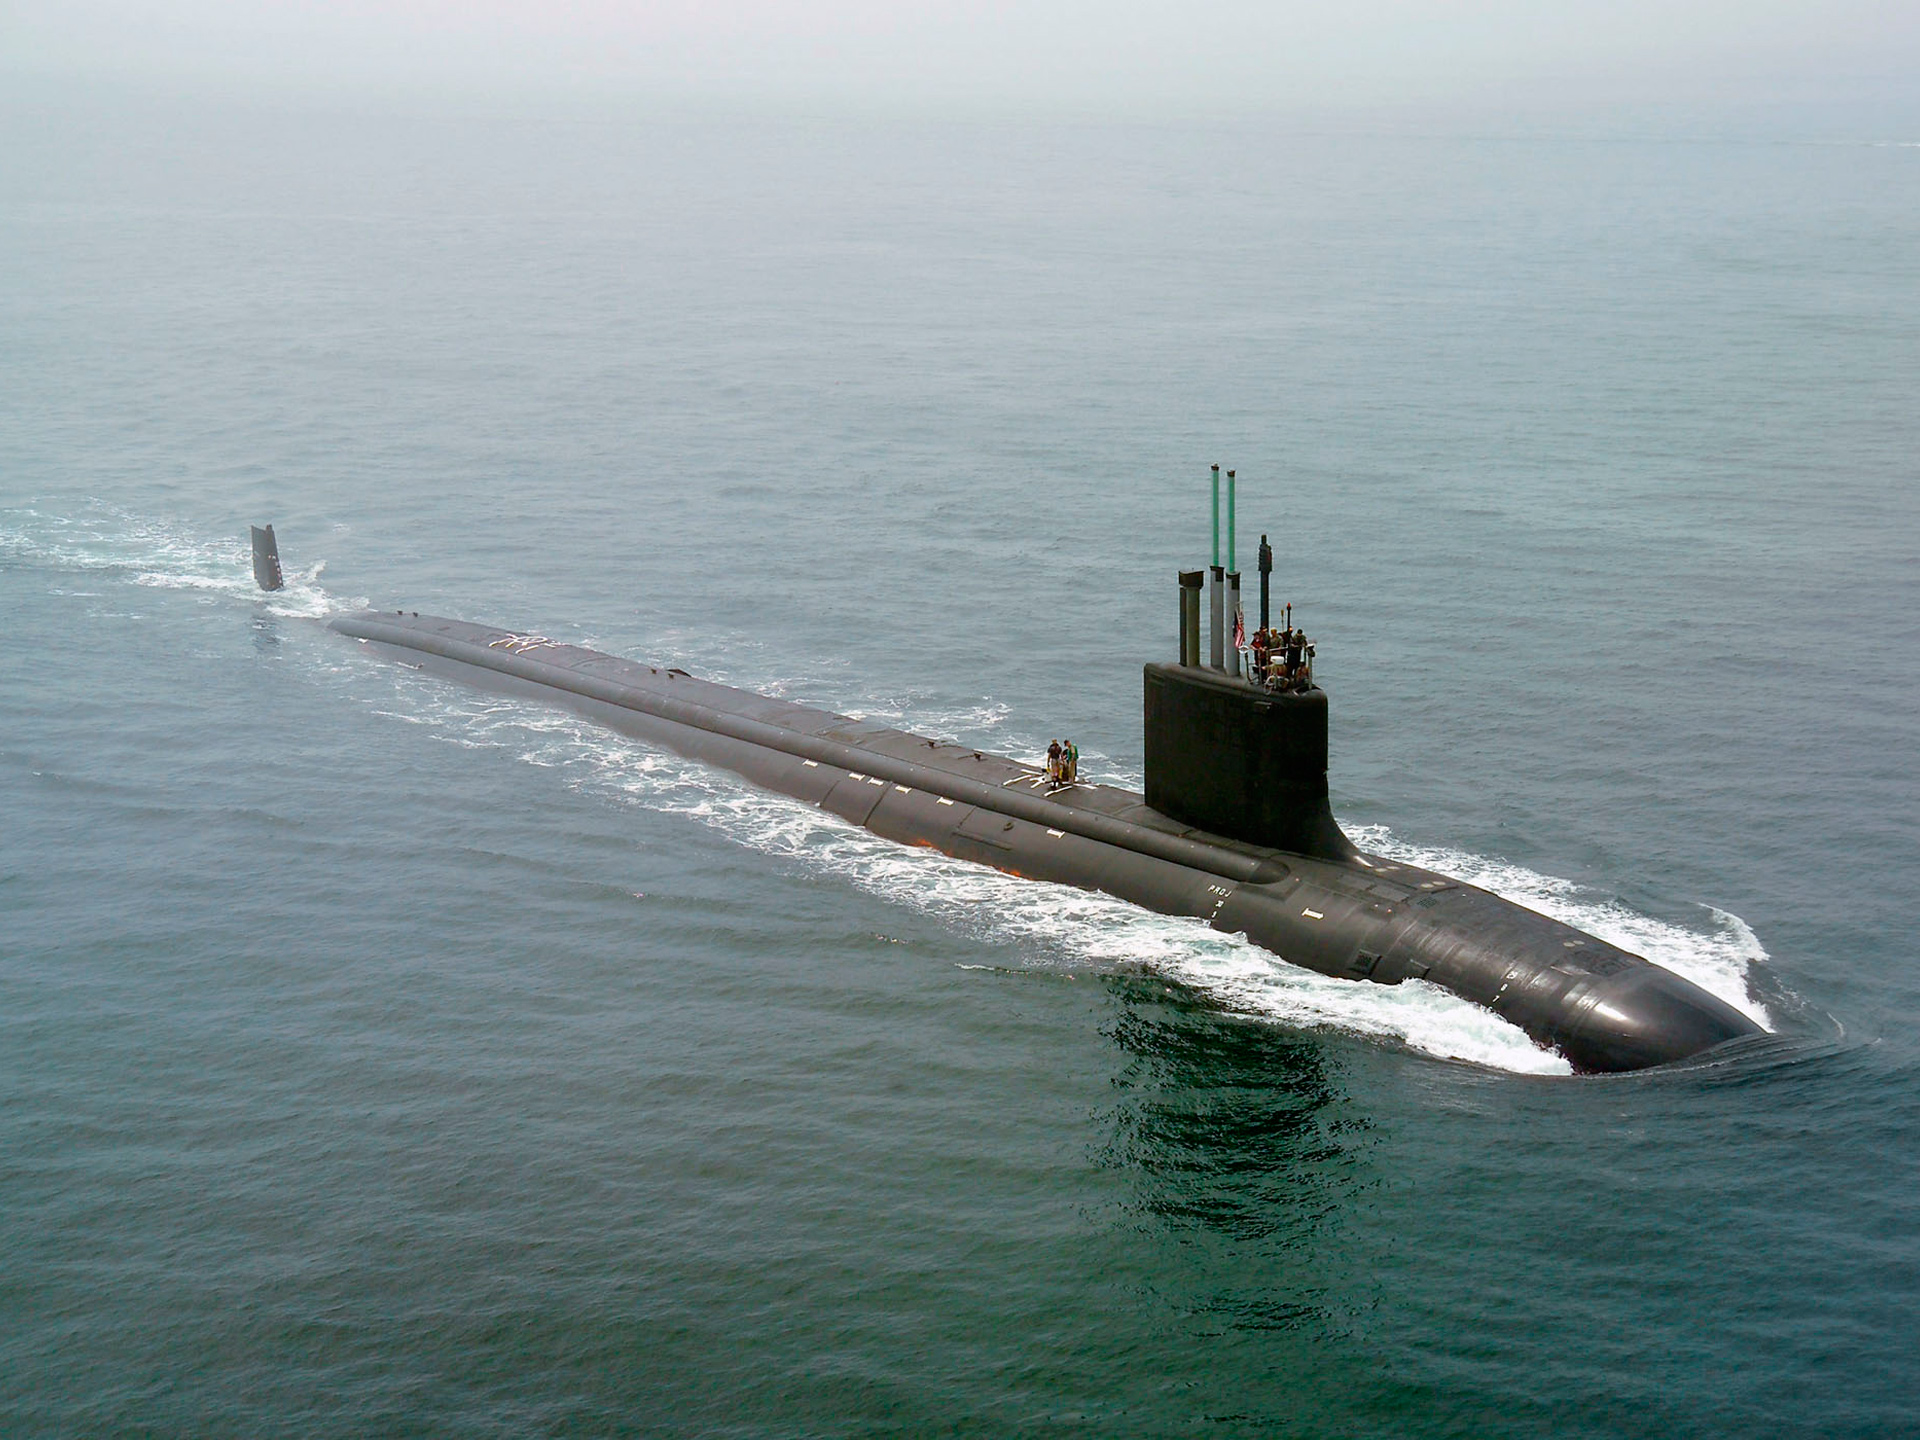  Wallpaper Wallpapers US Navy Submarines PicuresMilitary Nuclear 1920x1440